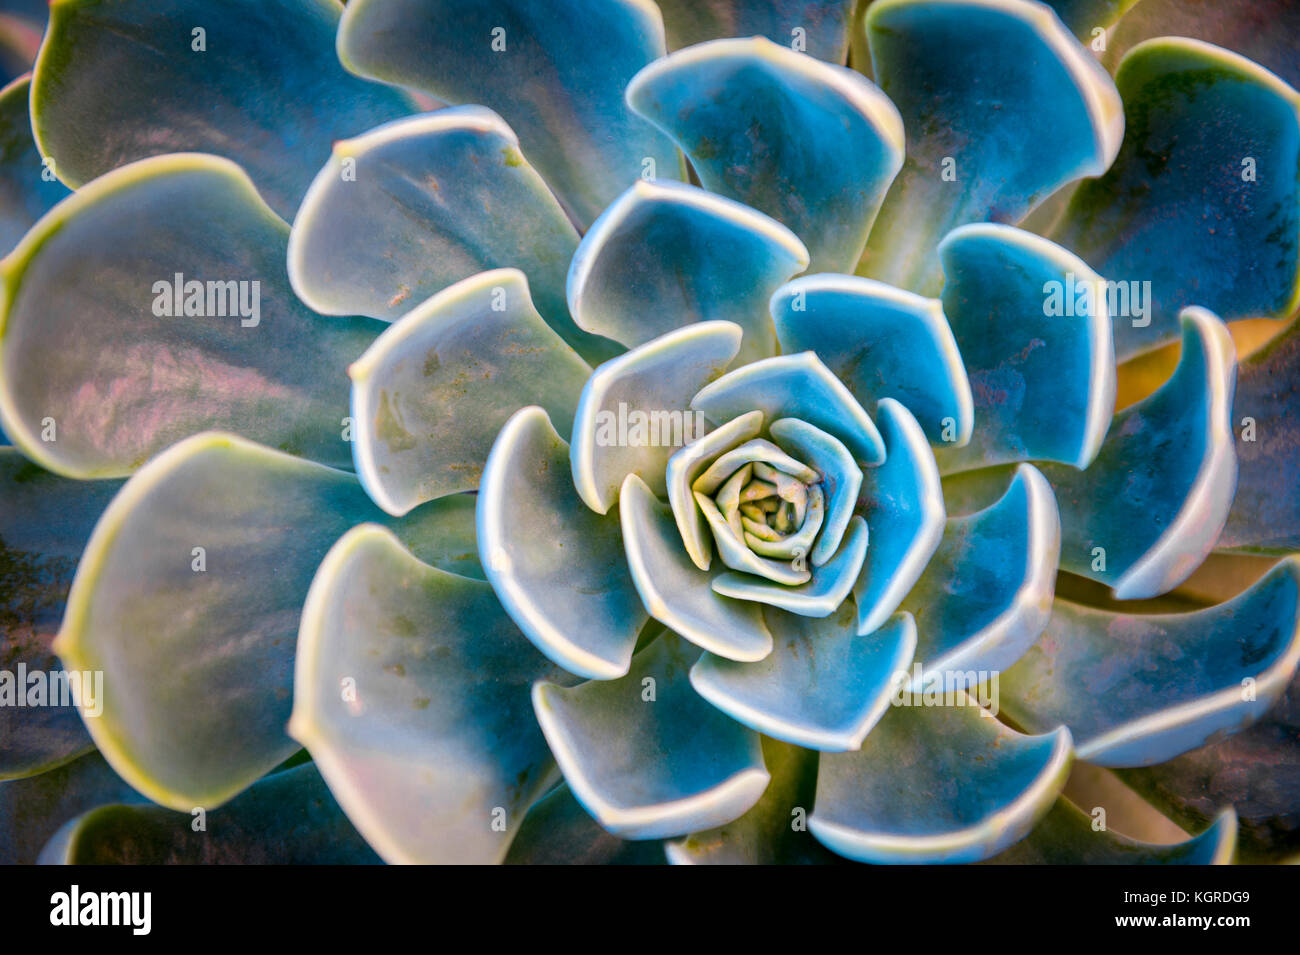 Abstract close-up of the colorful natural rosette pattern of a succulent plant, Echeveria Capri, growing in the Mediterranean island of Capri, Italy Stock Photo